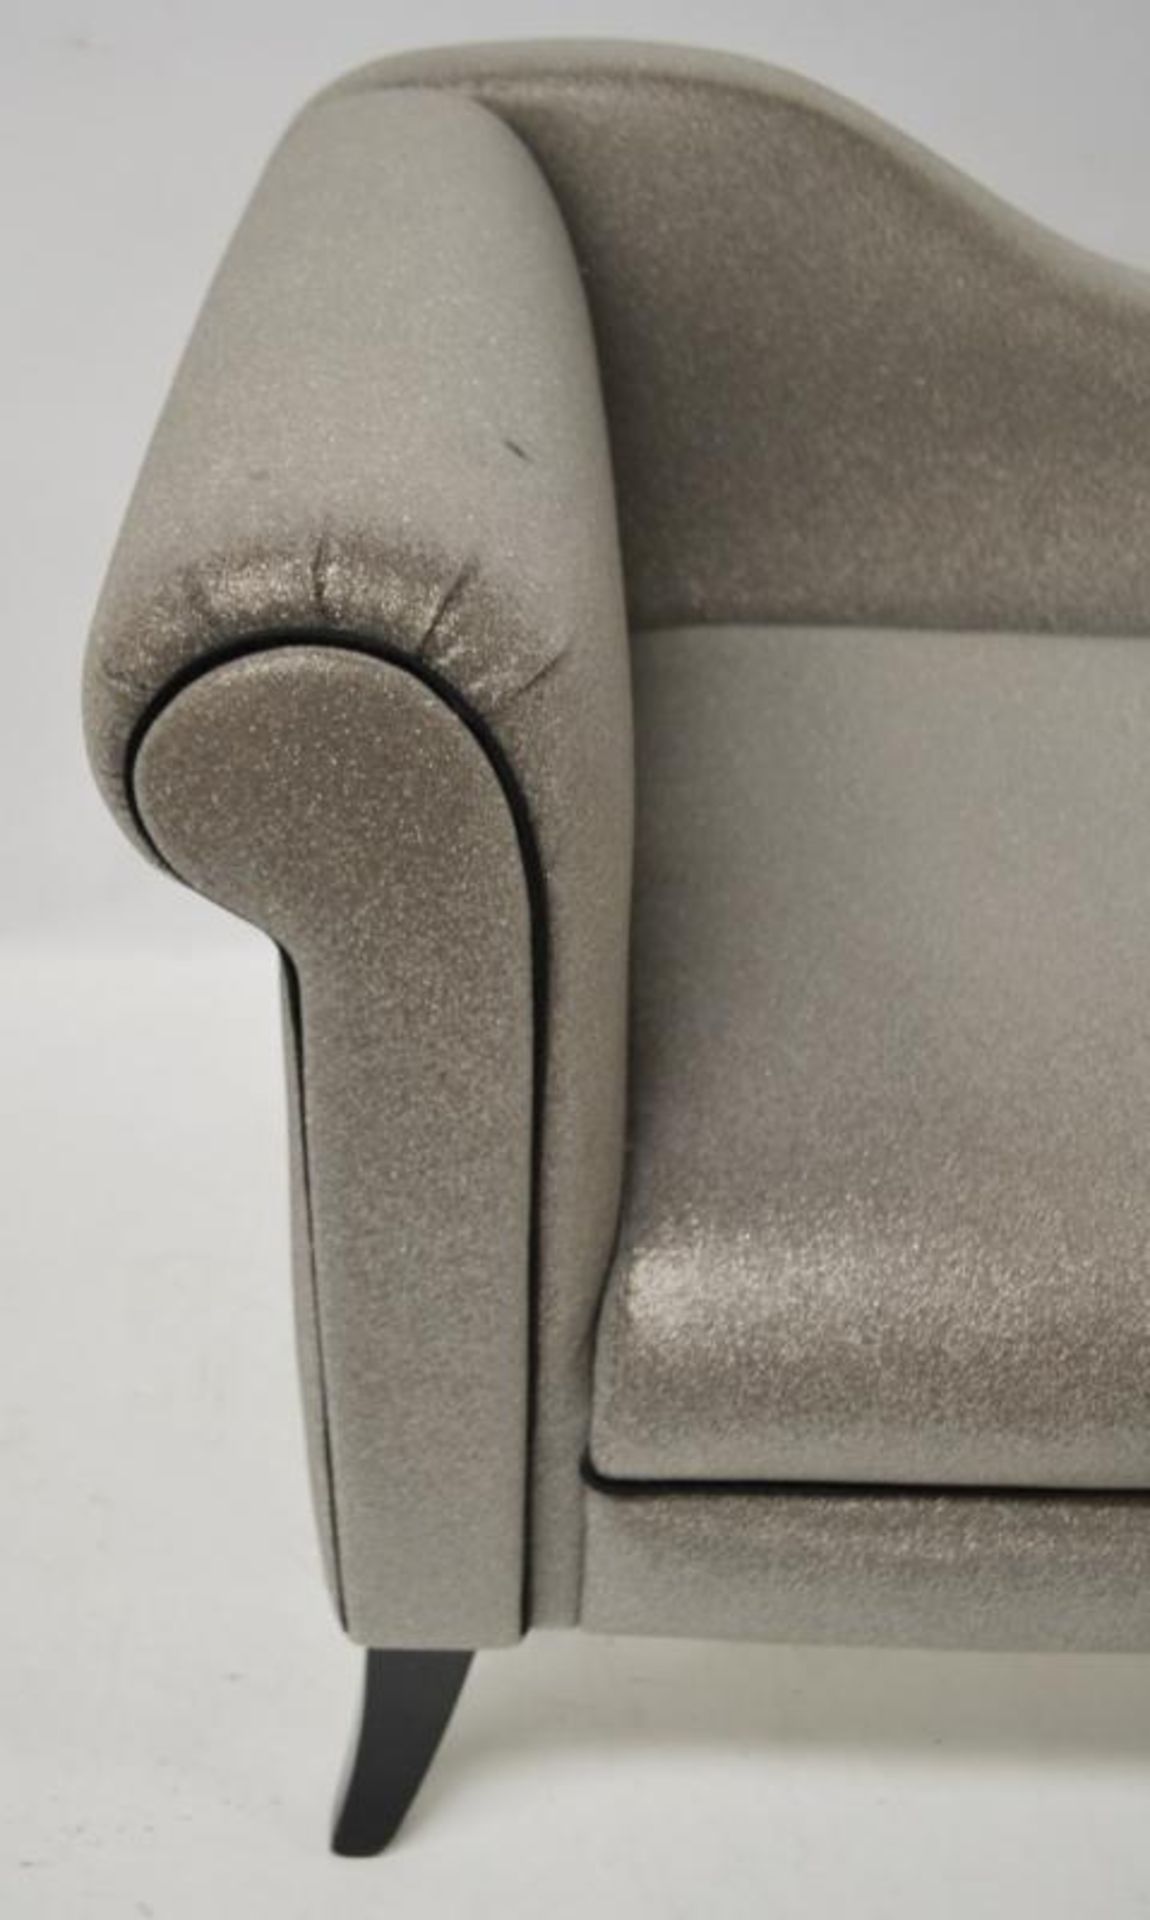 1 x Chaise Lounge Chair Finished In Silver Glitter - Ref: BLT376 - CL380 - NO VAT ON THE HAMMER - - Image 8 of 8